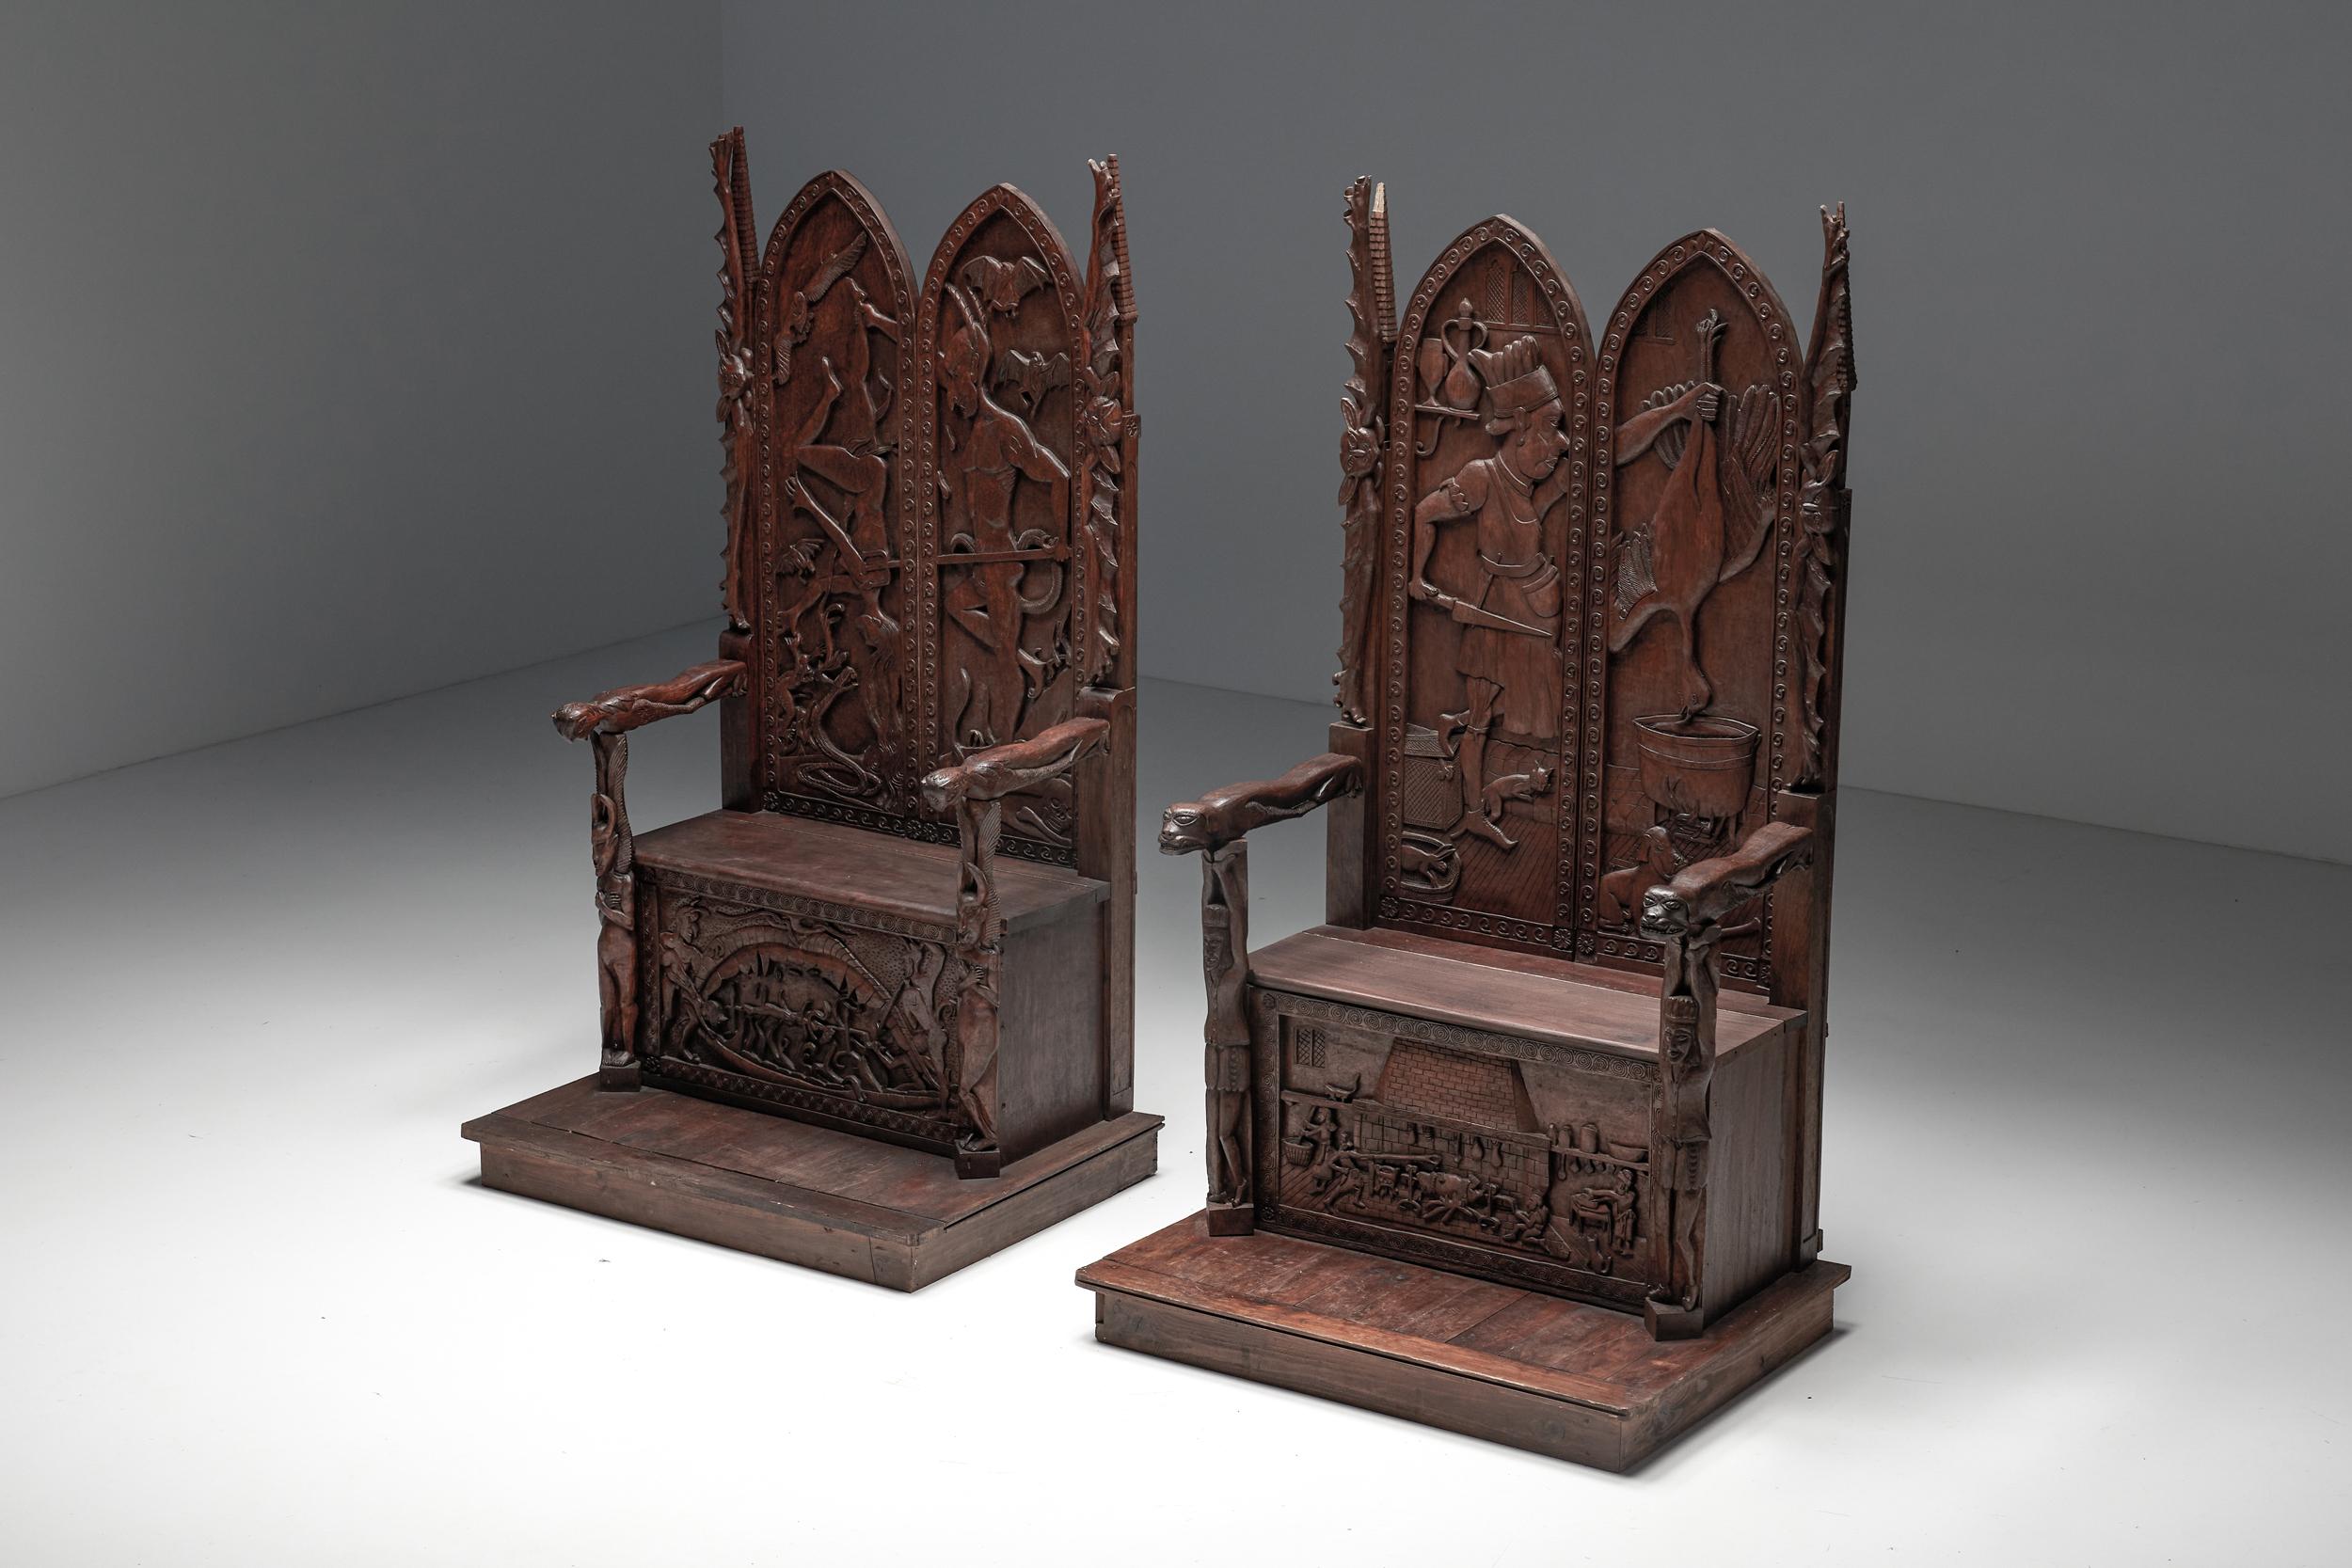 Wood; Carved; Throne Chair; Side Chair; Relief Design; 20th Century; Europe; Woodworking;

A pair of unusual antique throne chairs made of solid wood with exquisite carvings, dating from the 20th century. These exceptional statement pieces are